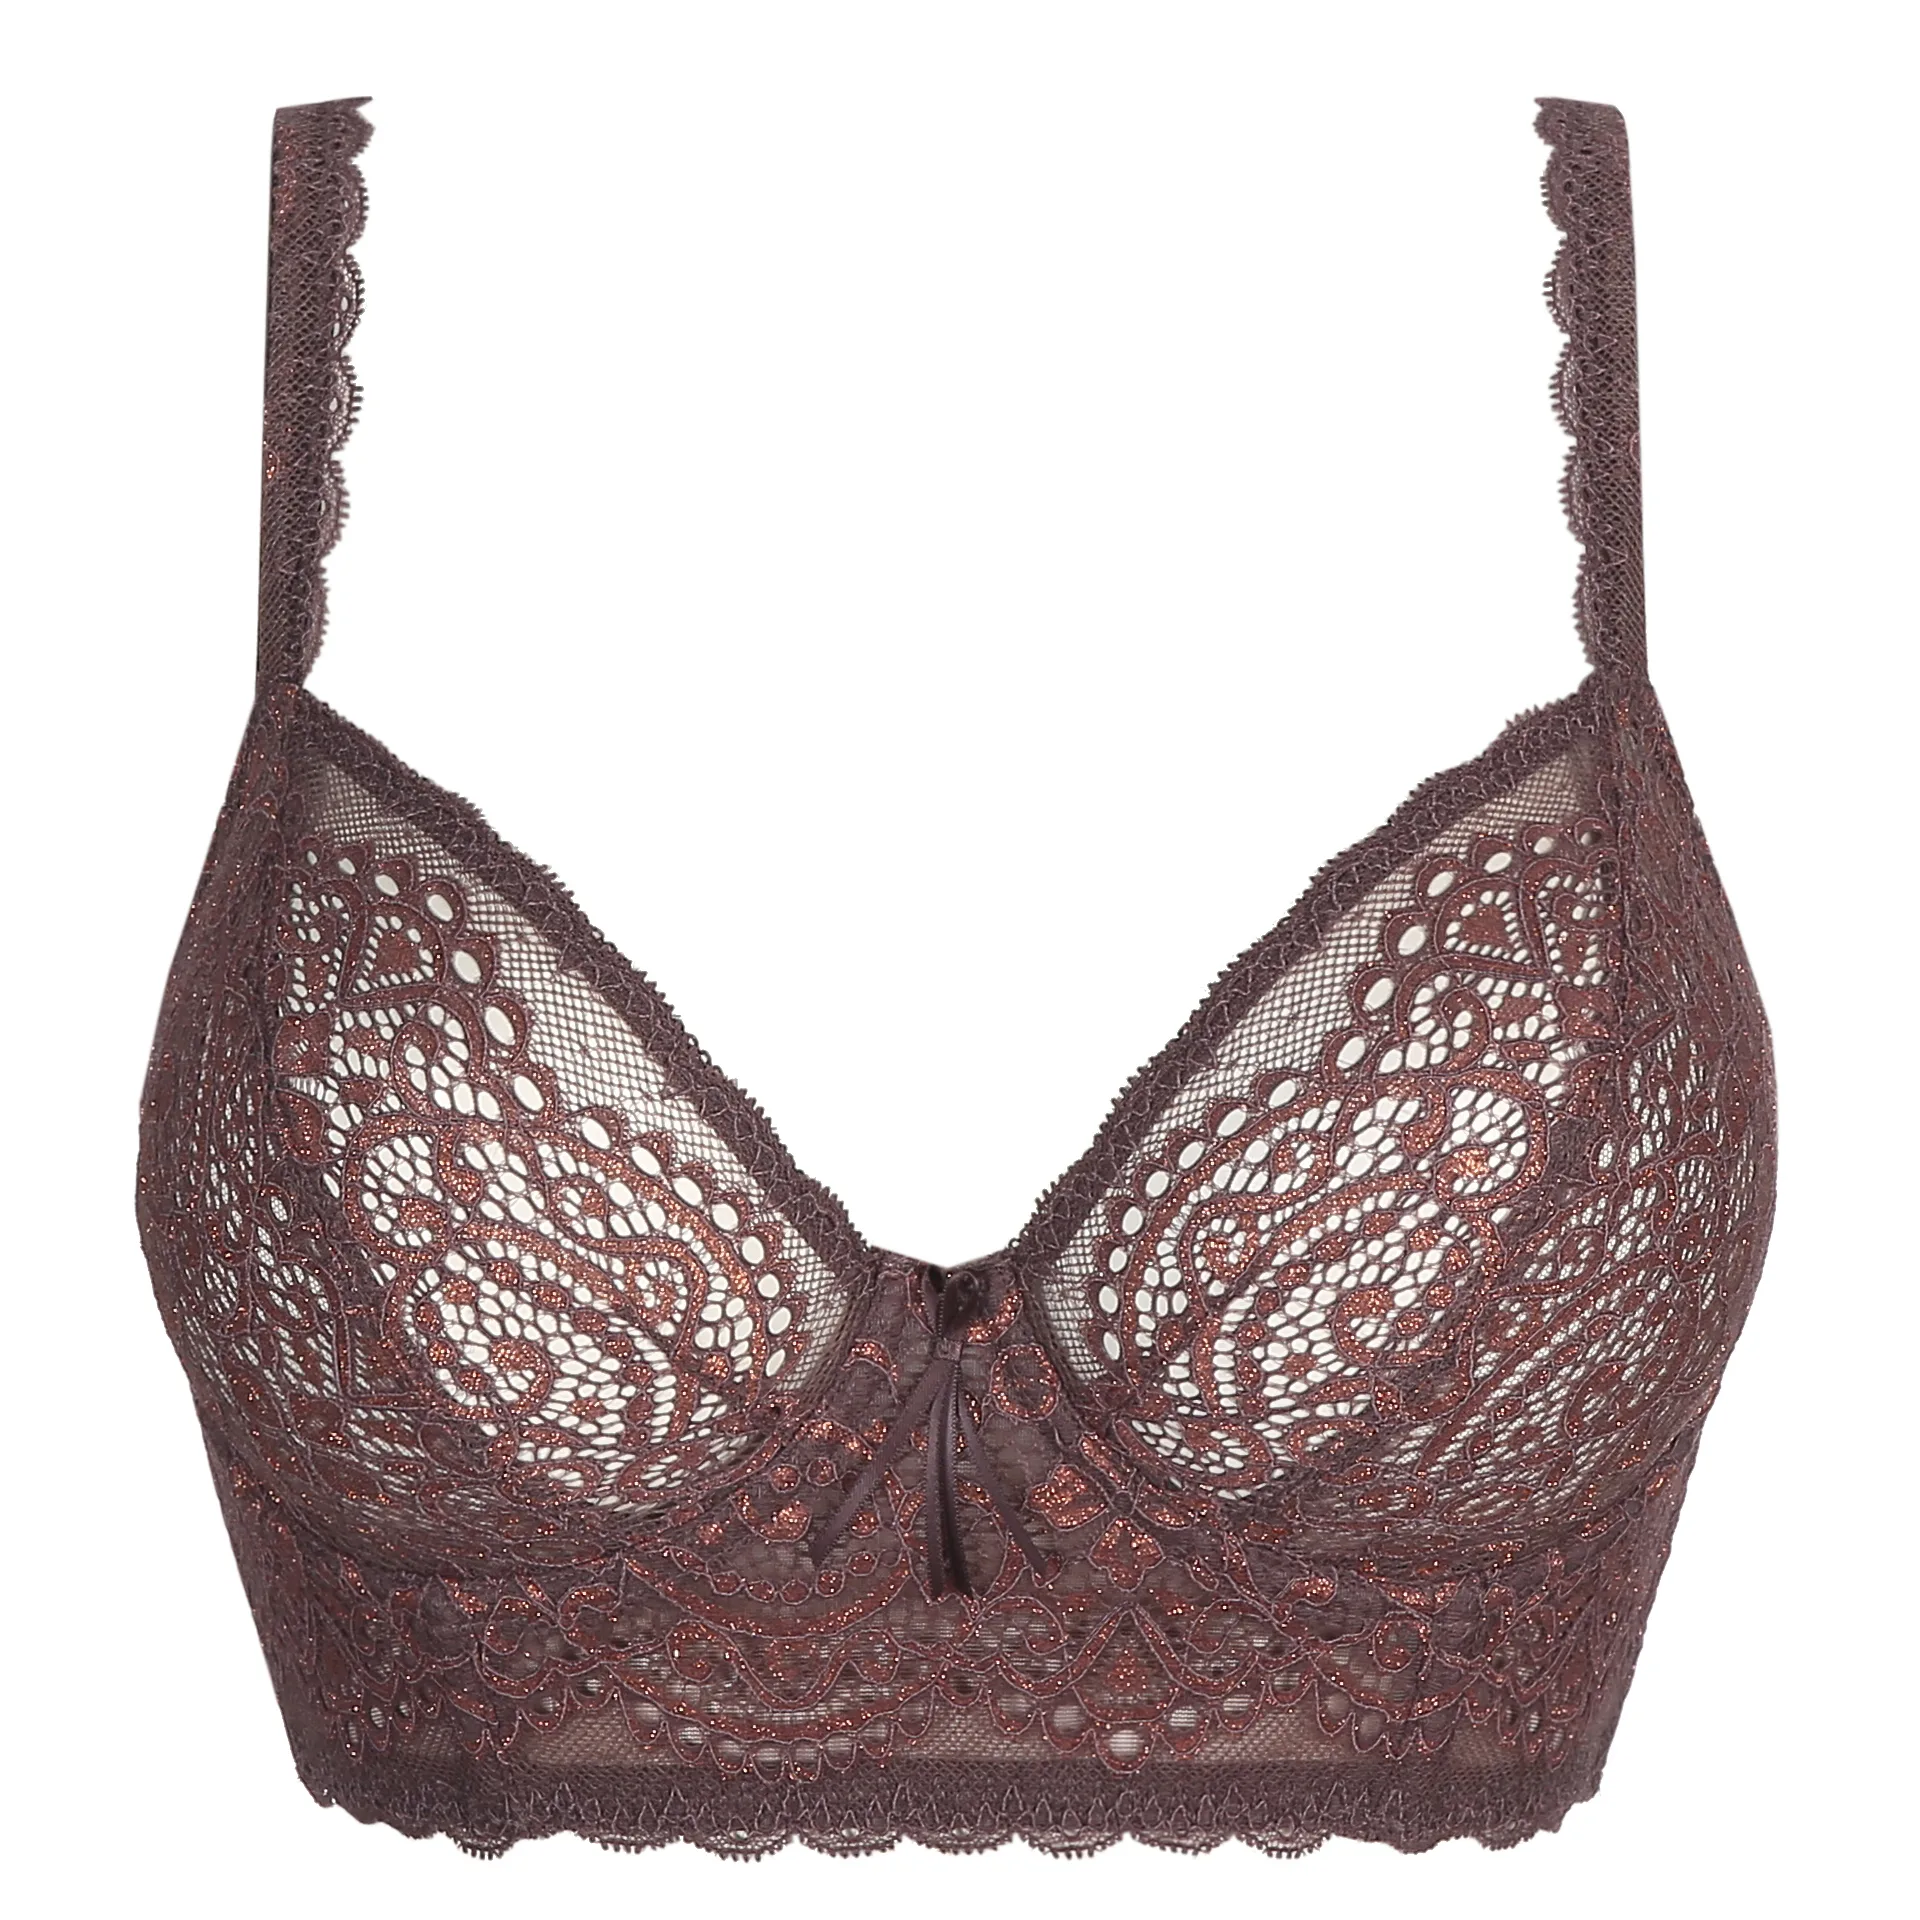 Elegant Lace Bralette for a Delicate Look